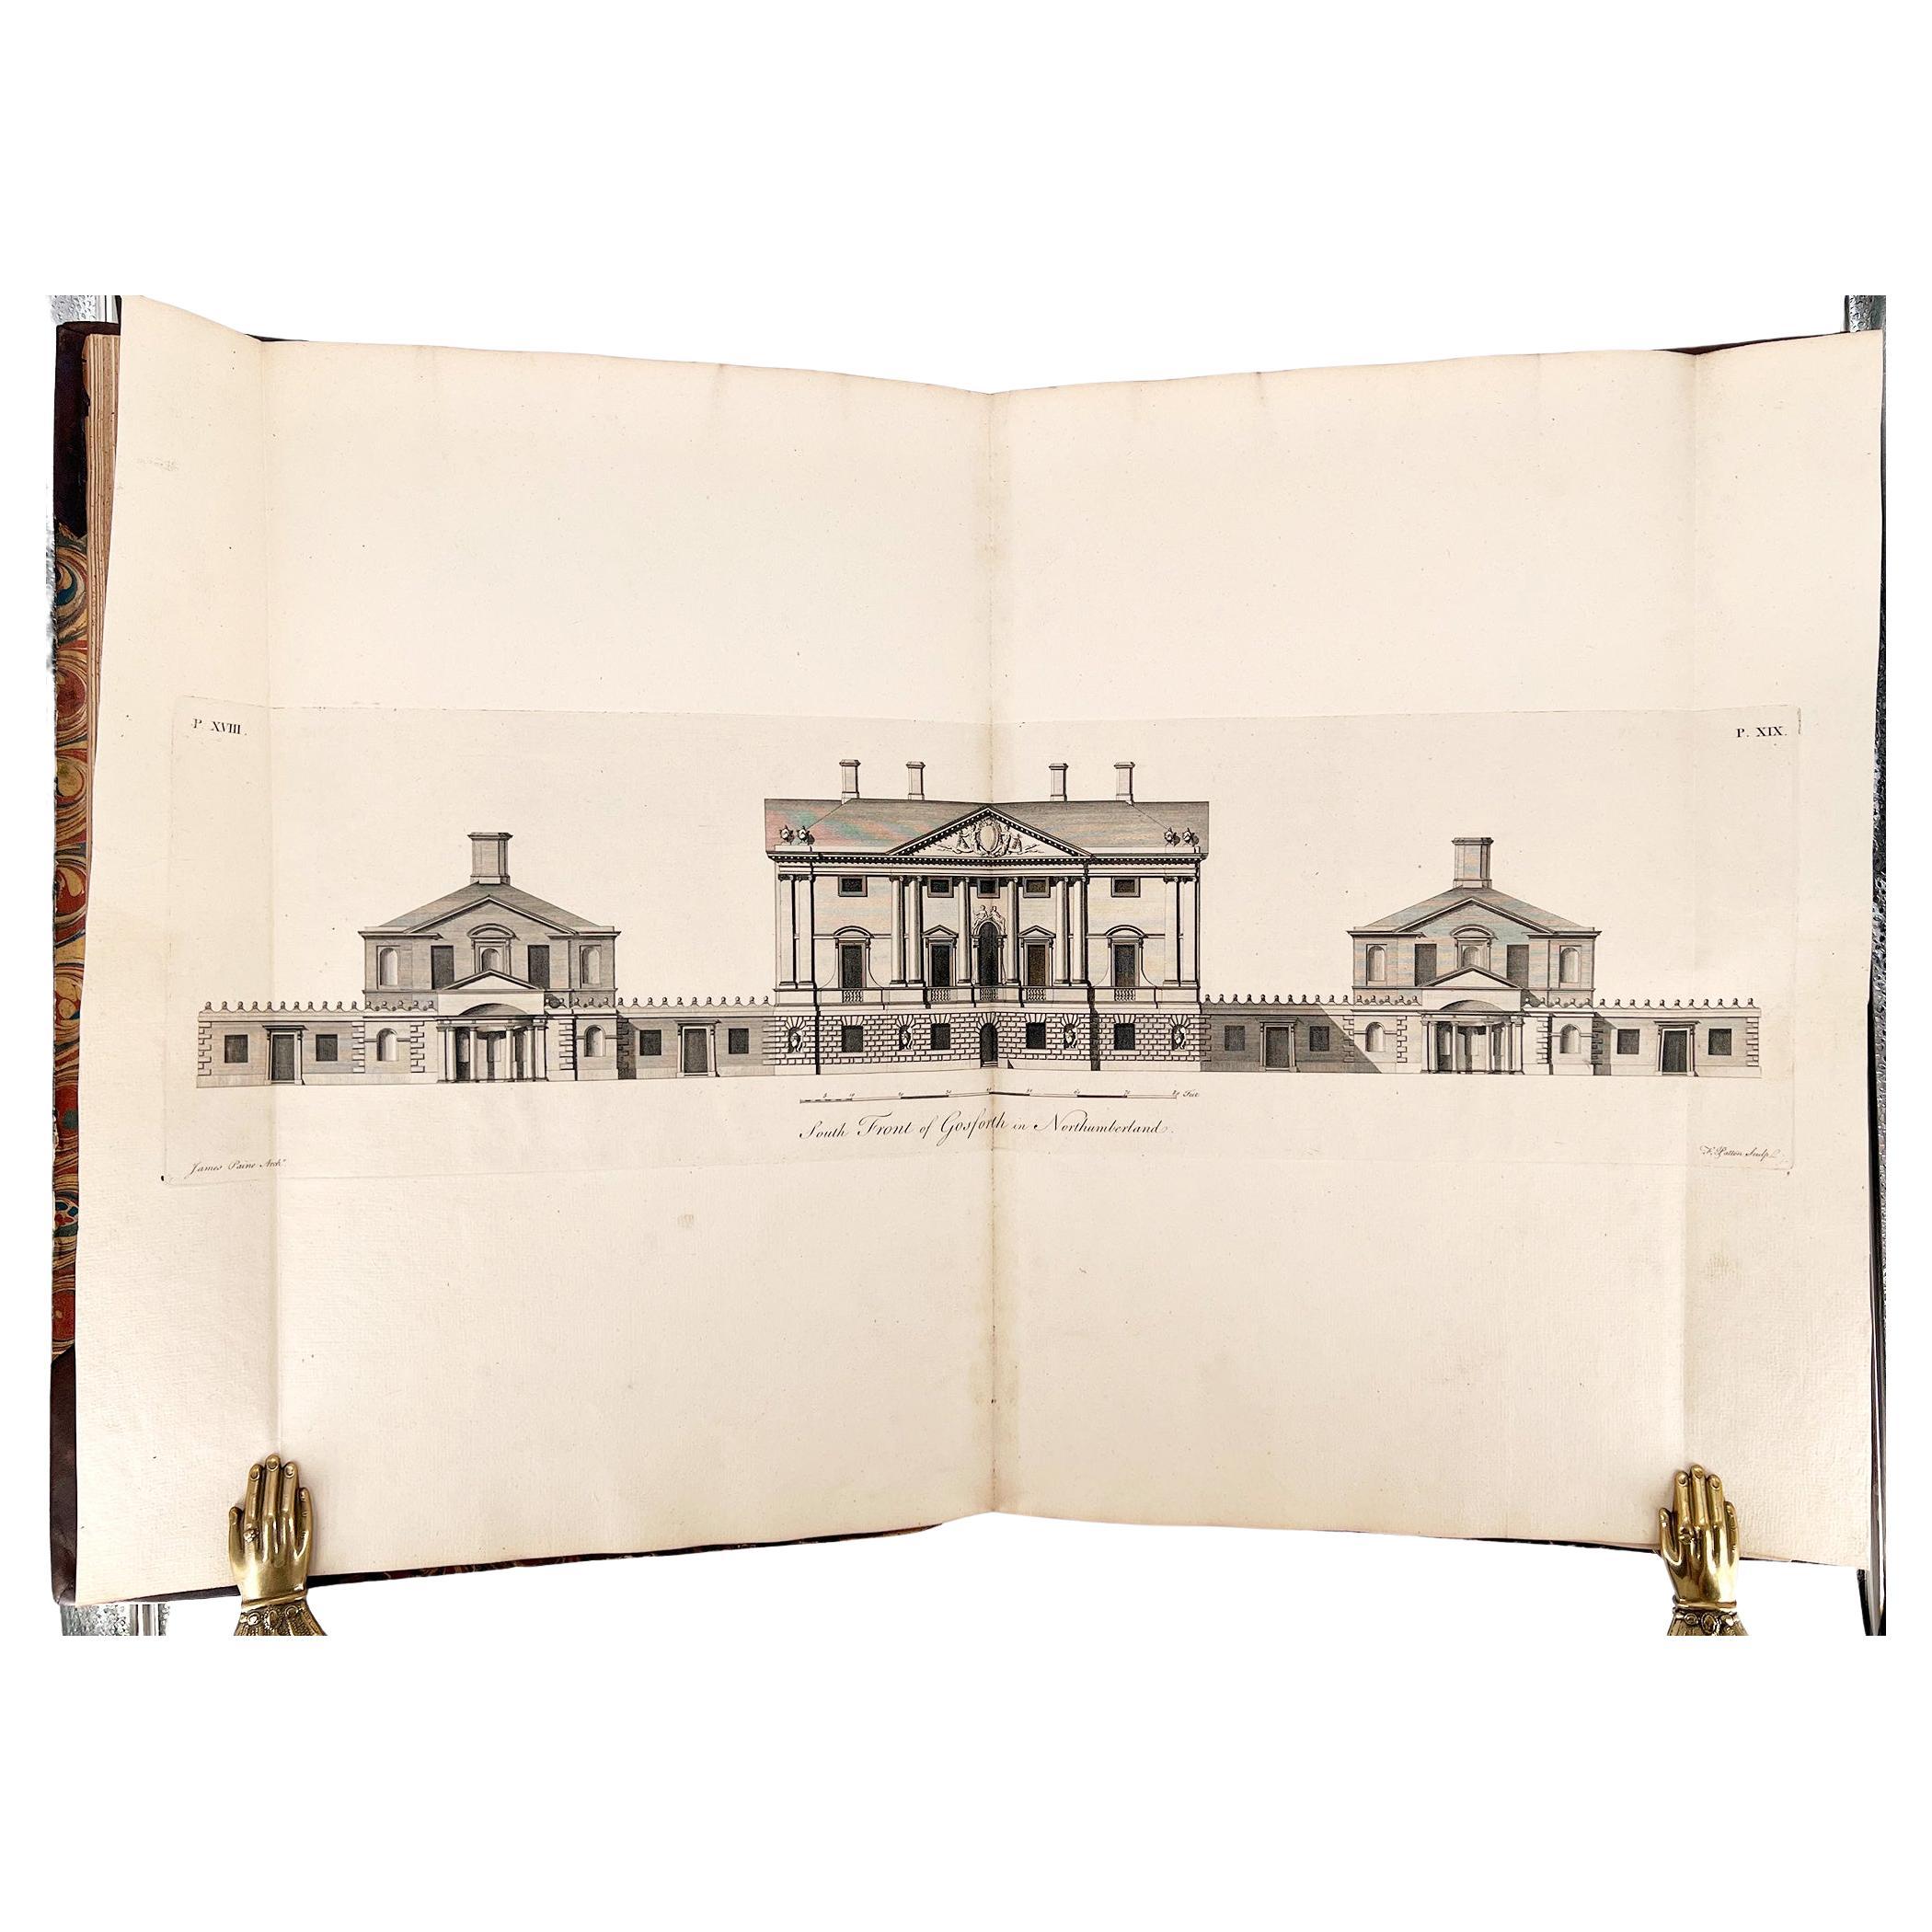 James Paine – Plans, Elevations and Section of Noblemen and Gentlemen's Houses For Sale